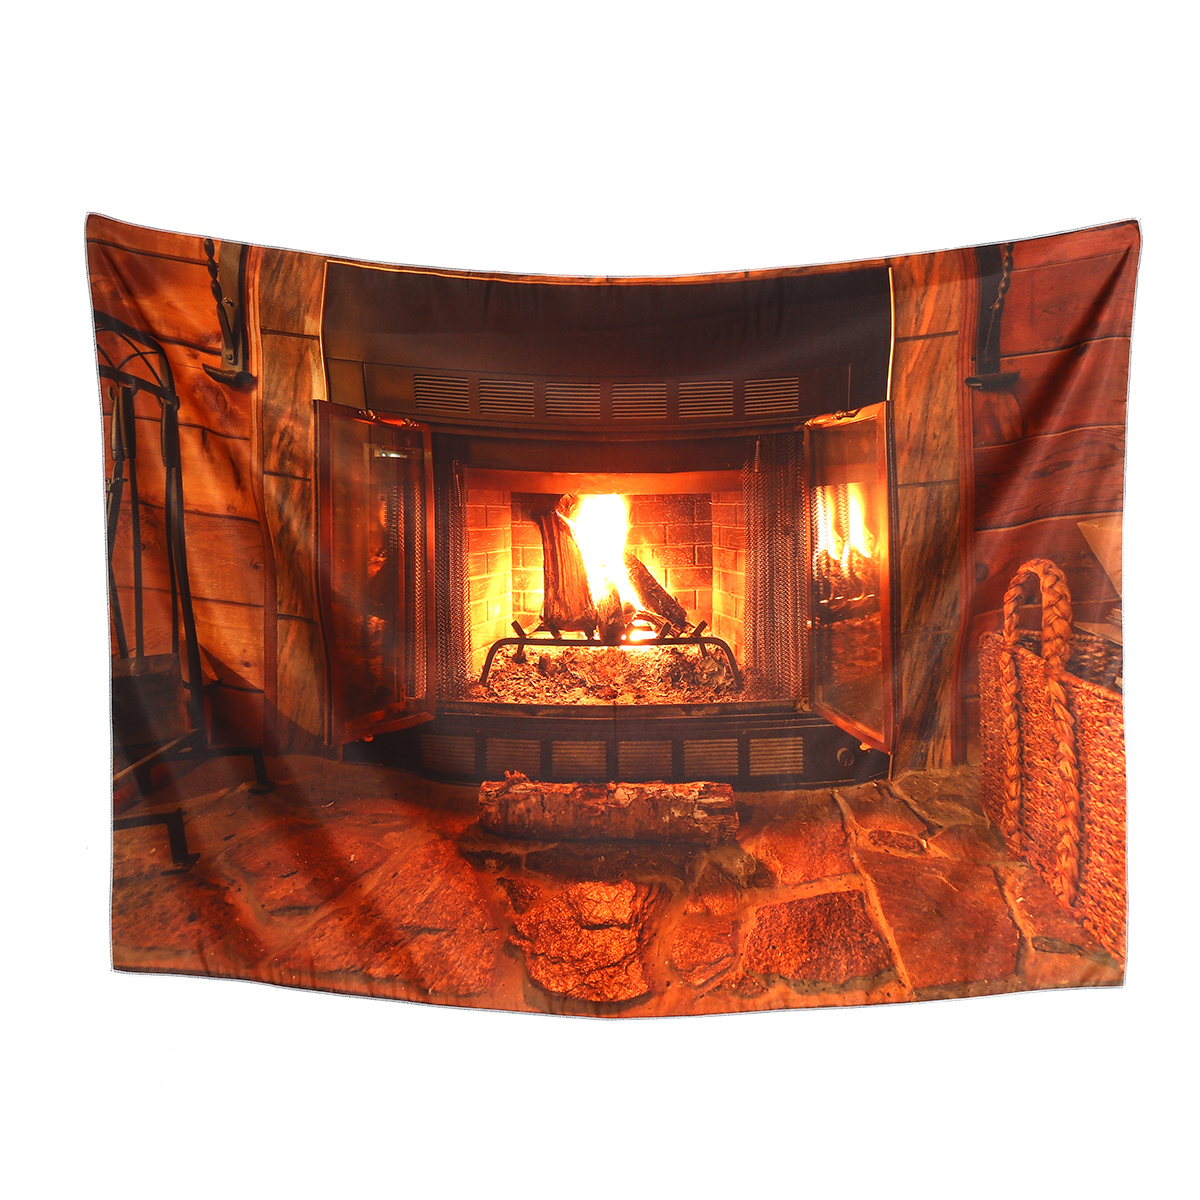 Polyester-Wall-Hanging-Tapestry-Art-Home-Decor-Fireplace-Pattern-Blankets-For-Home-Bedroom-Porch-Han-1636374-2